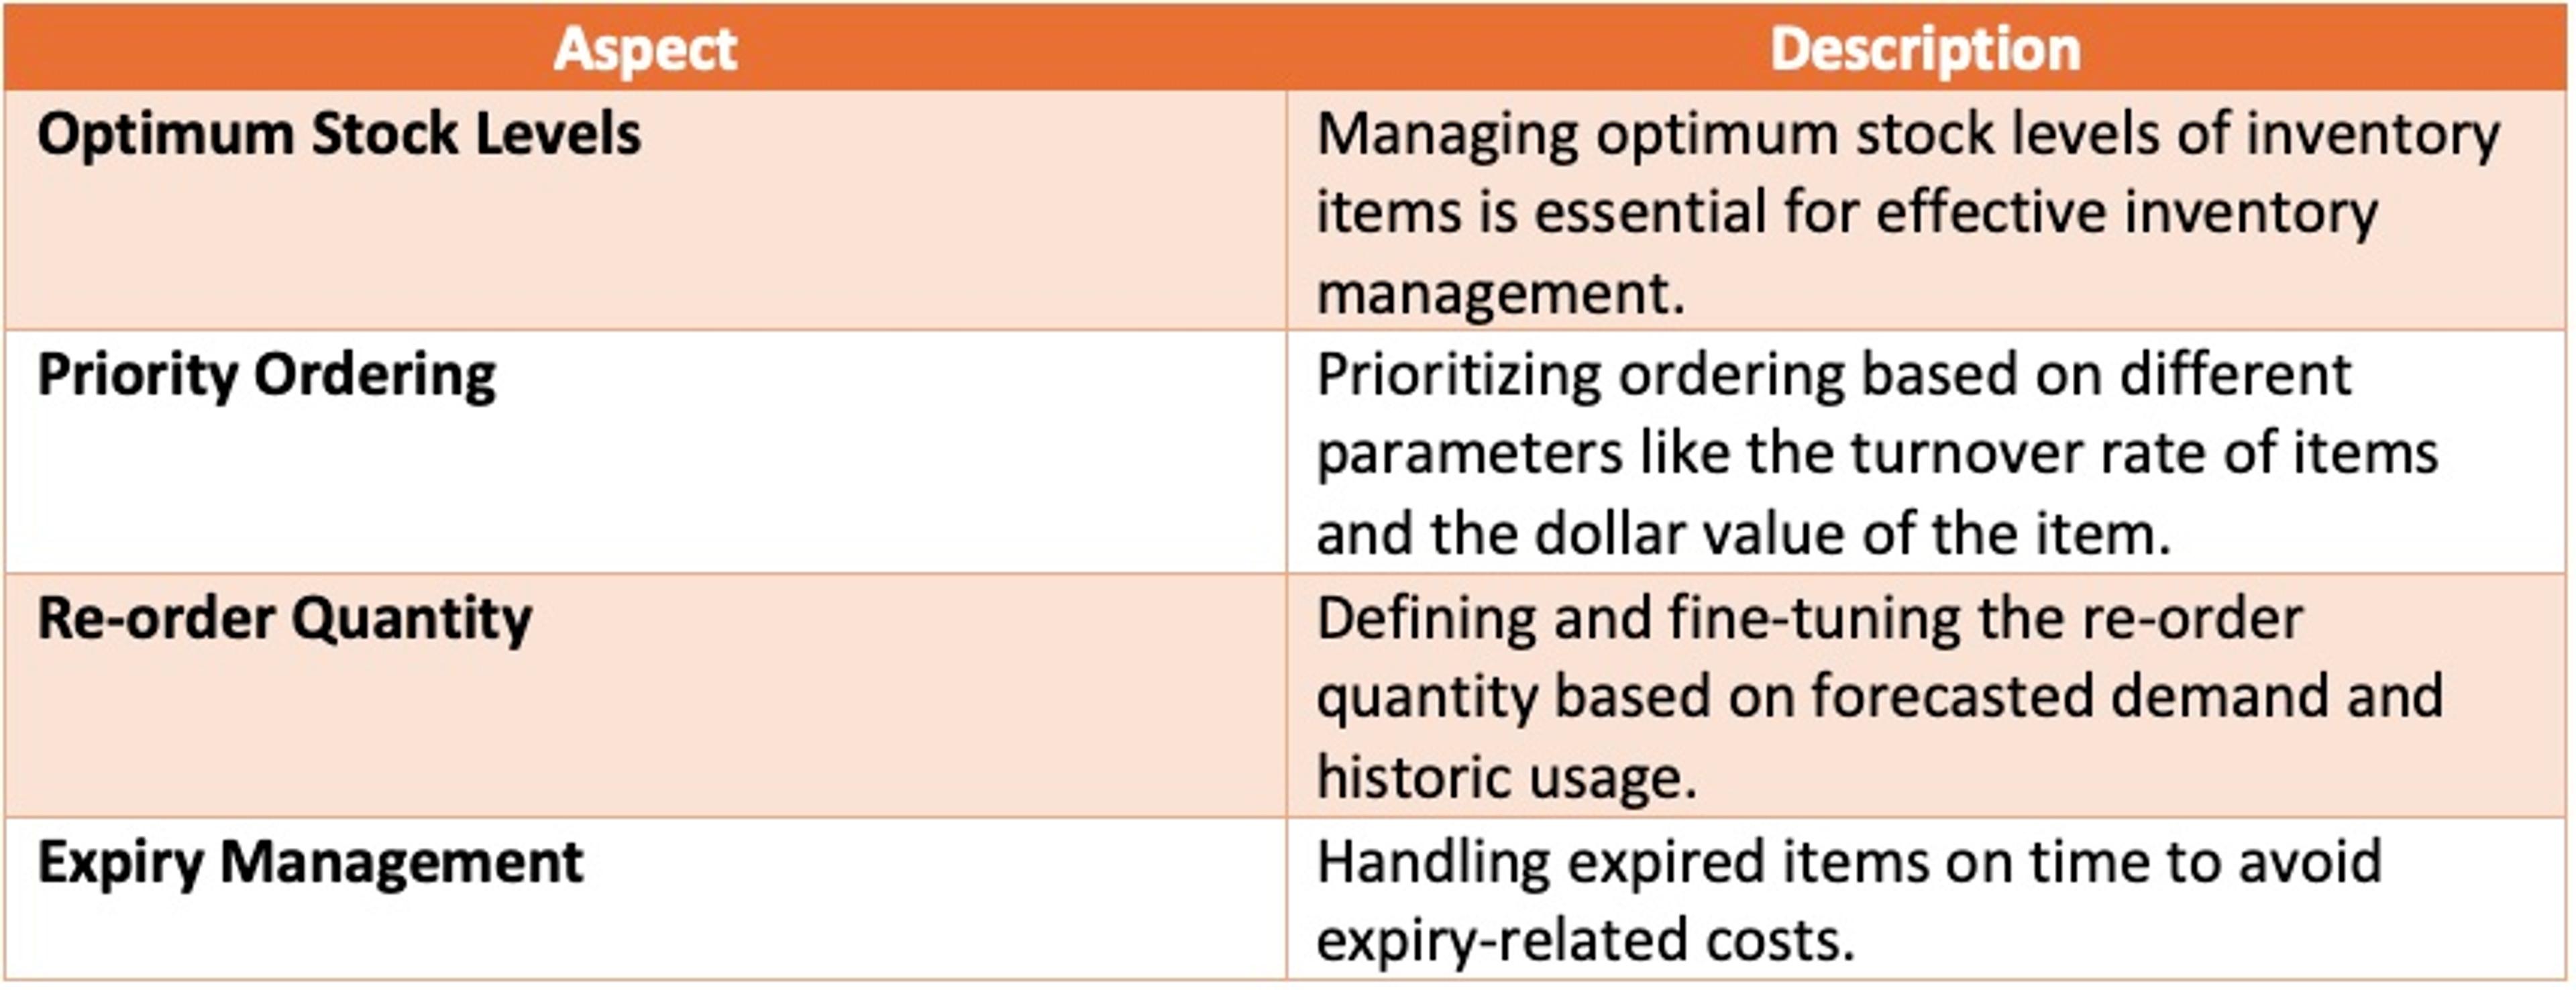 Key aspects of effective inventory management